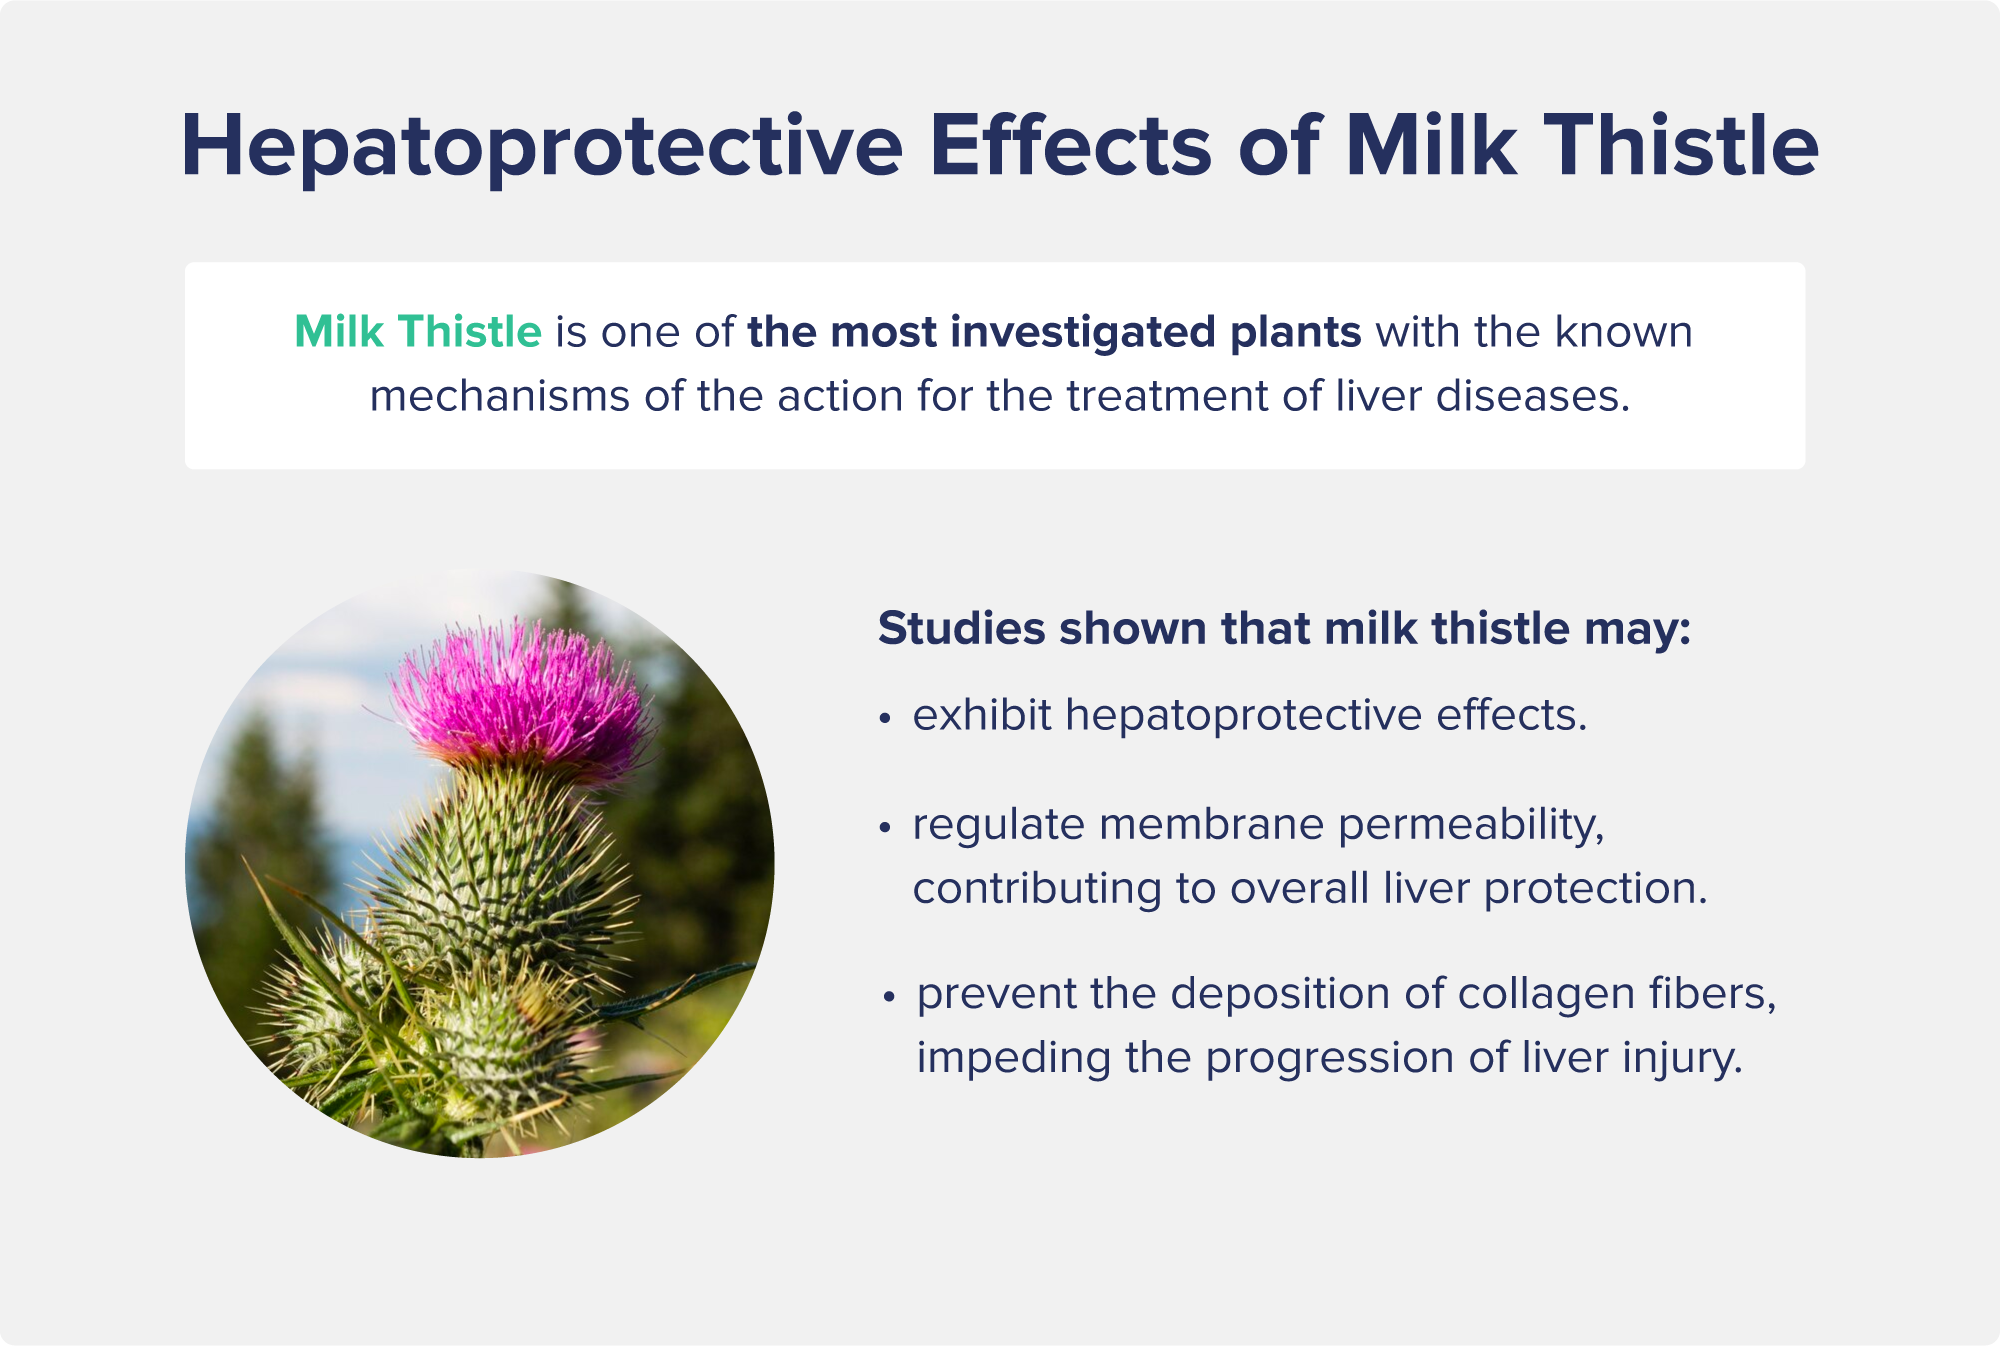 Hepatoprotective Effects of Milk Thistle